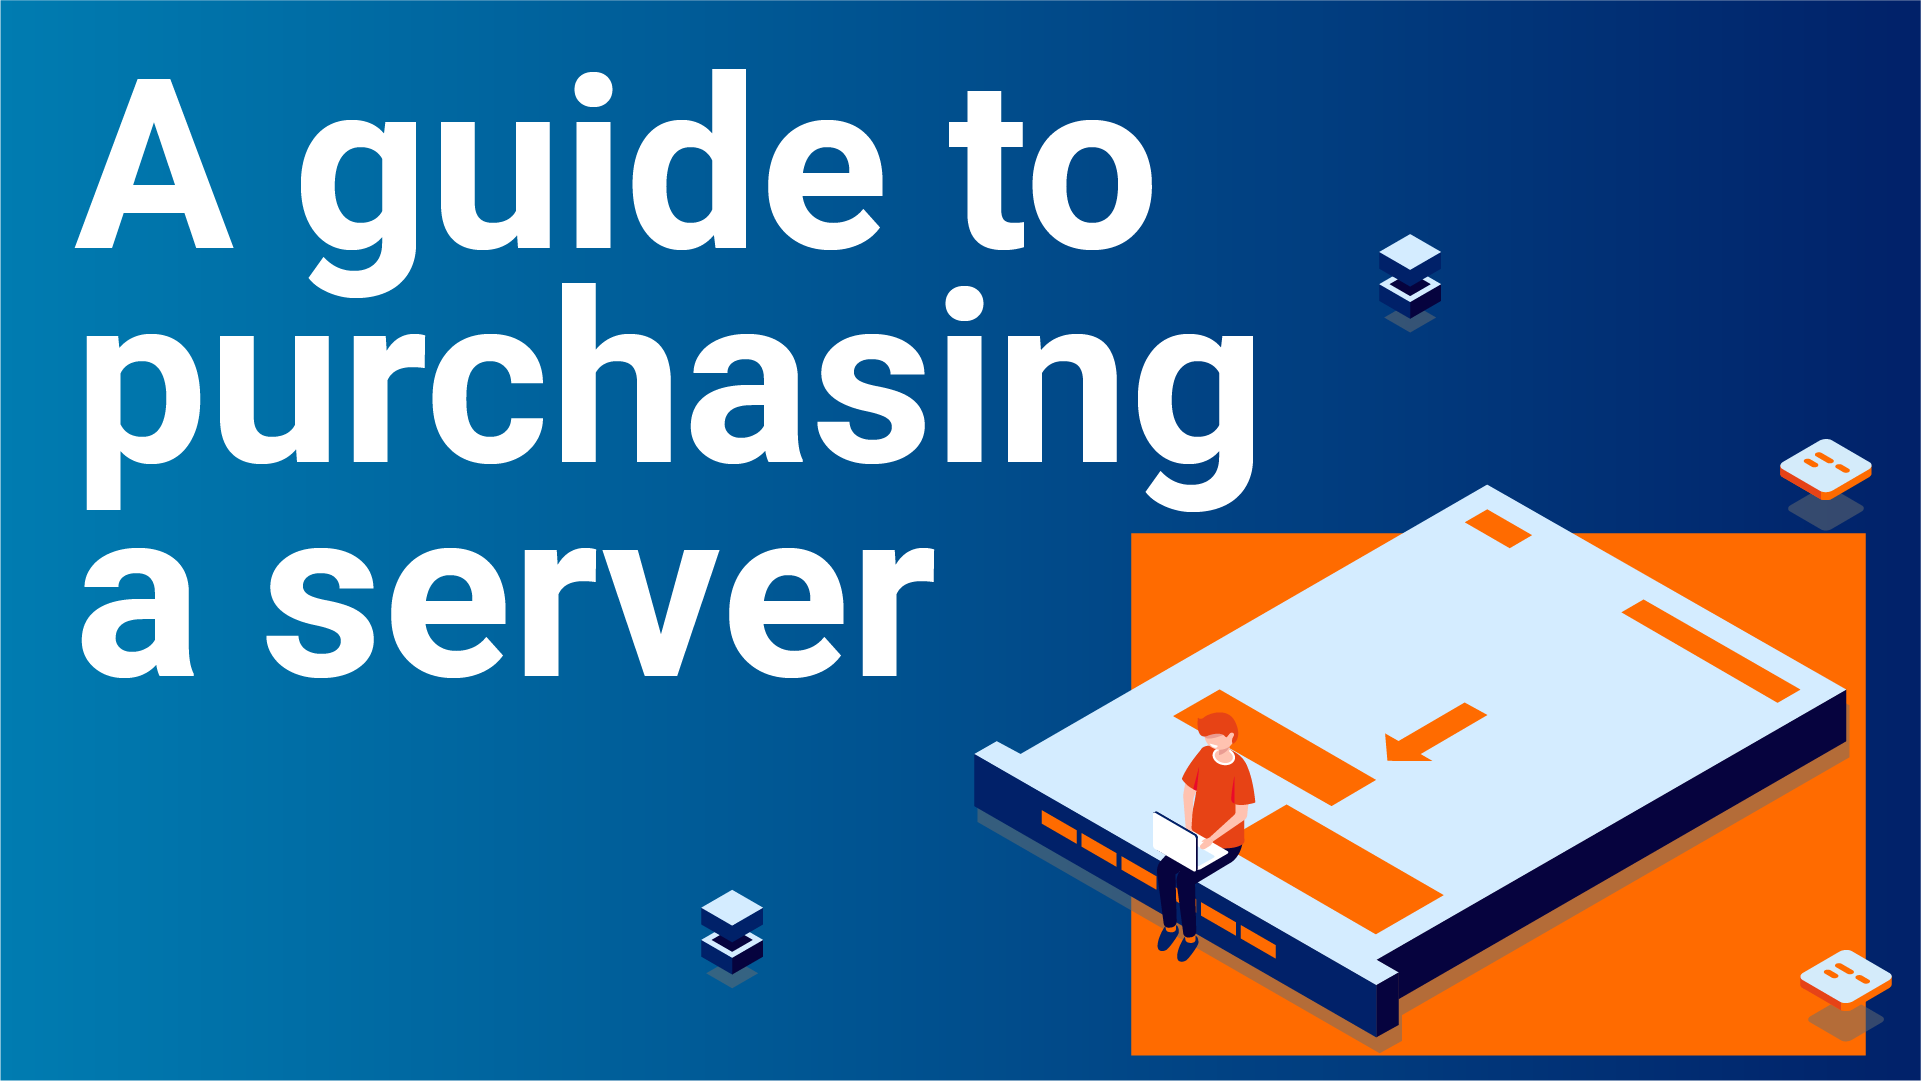 A guide to purchasing a server for a small business - Bytestock